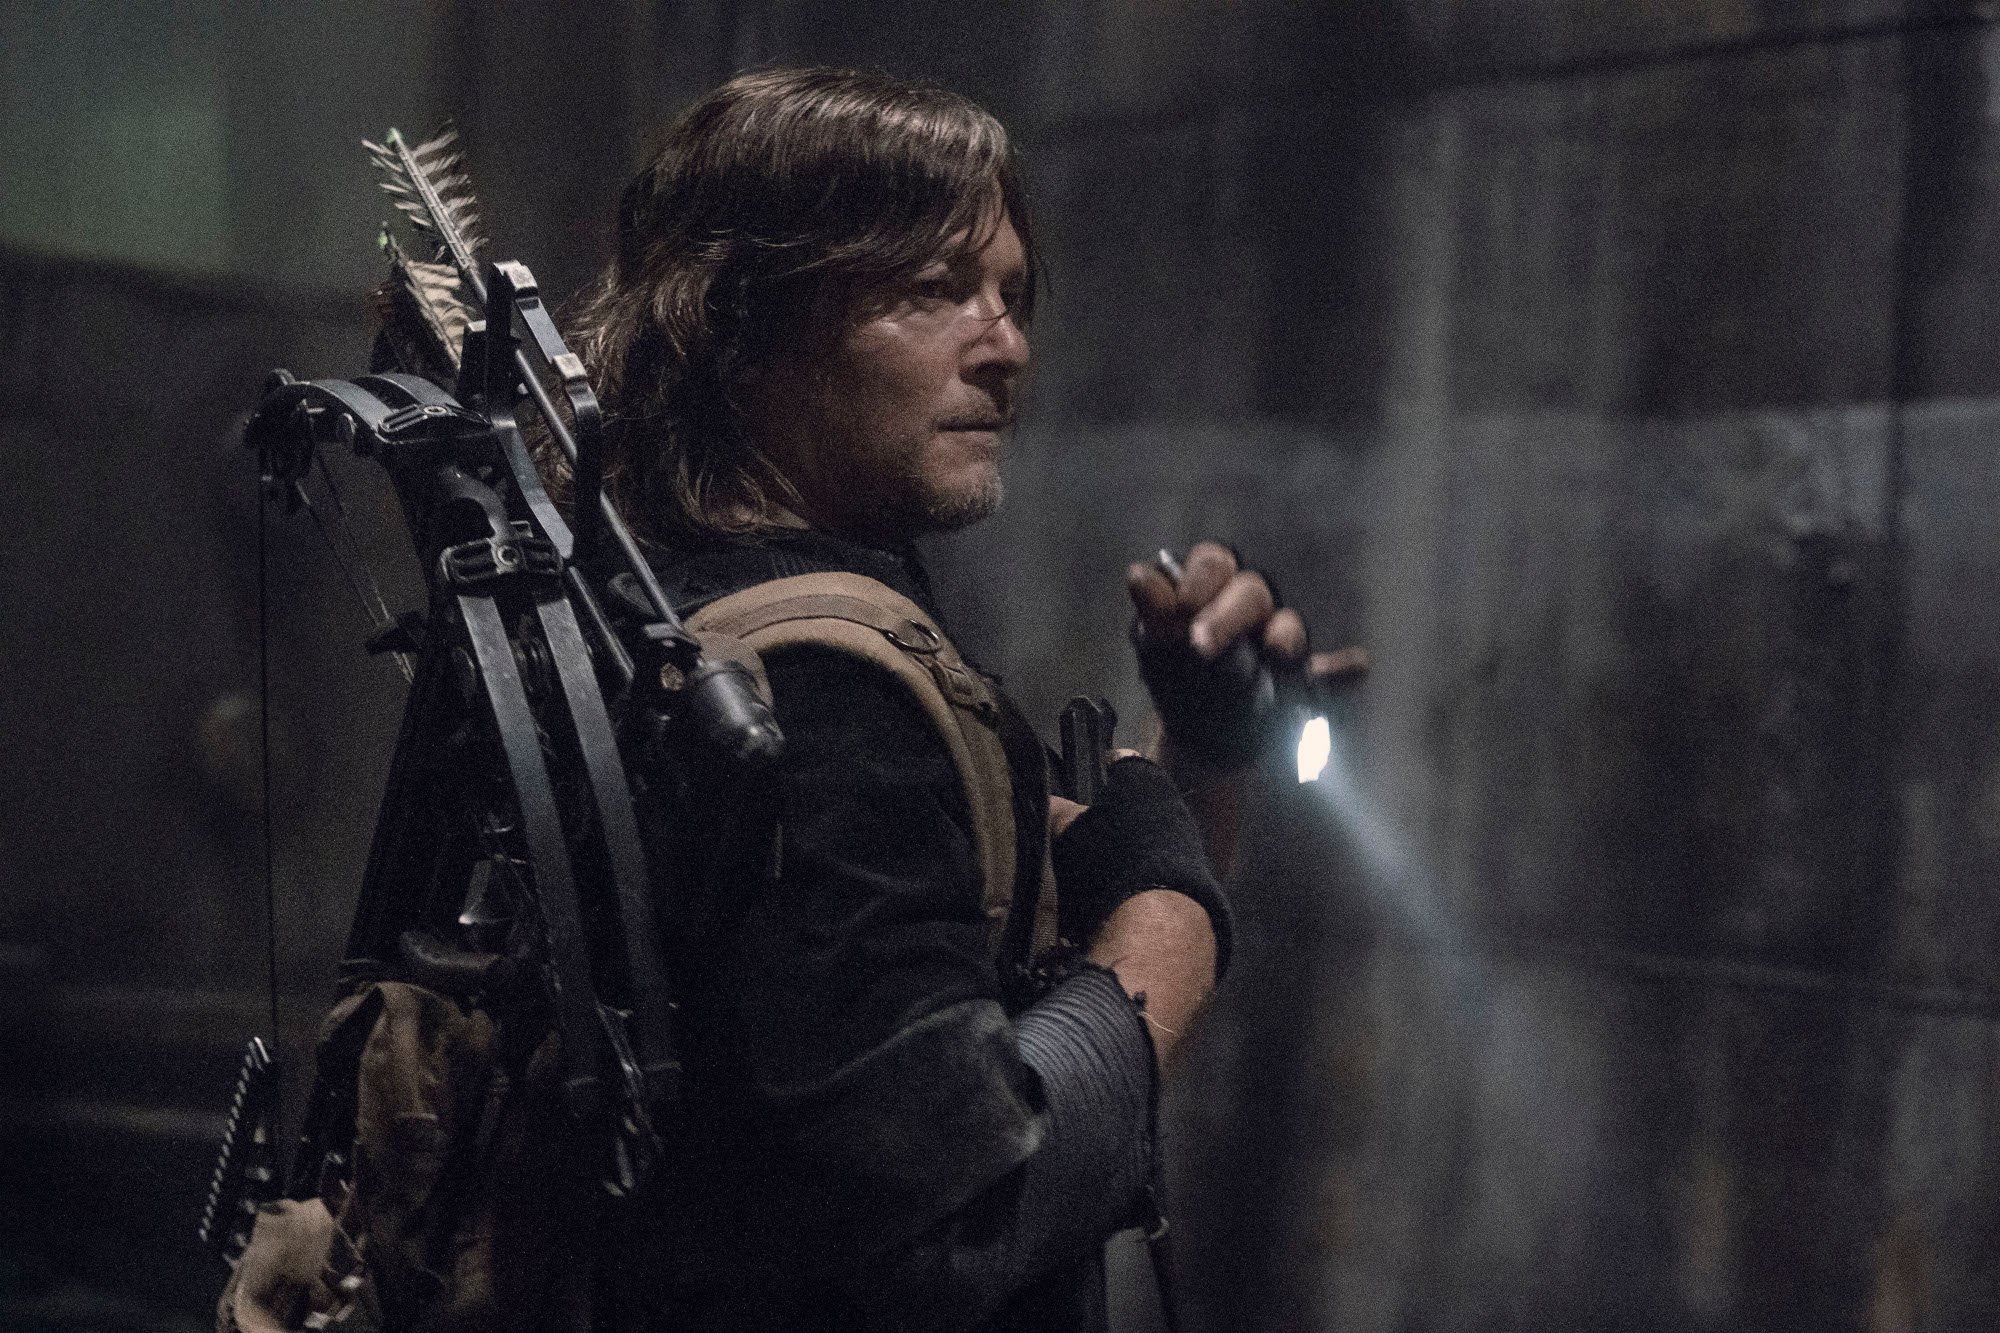 Norman Reedus in the final season of 'The Walking Dead' is standing in the dark, holding a knife, and looking over his shoulder